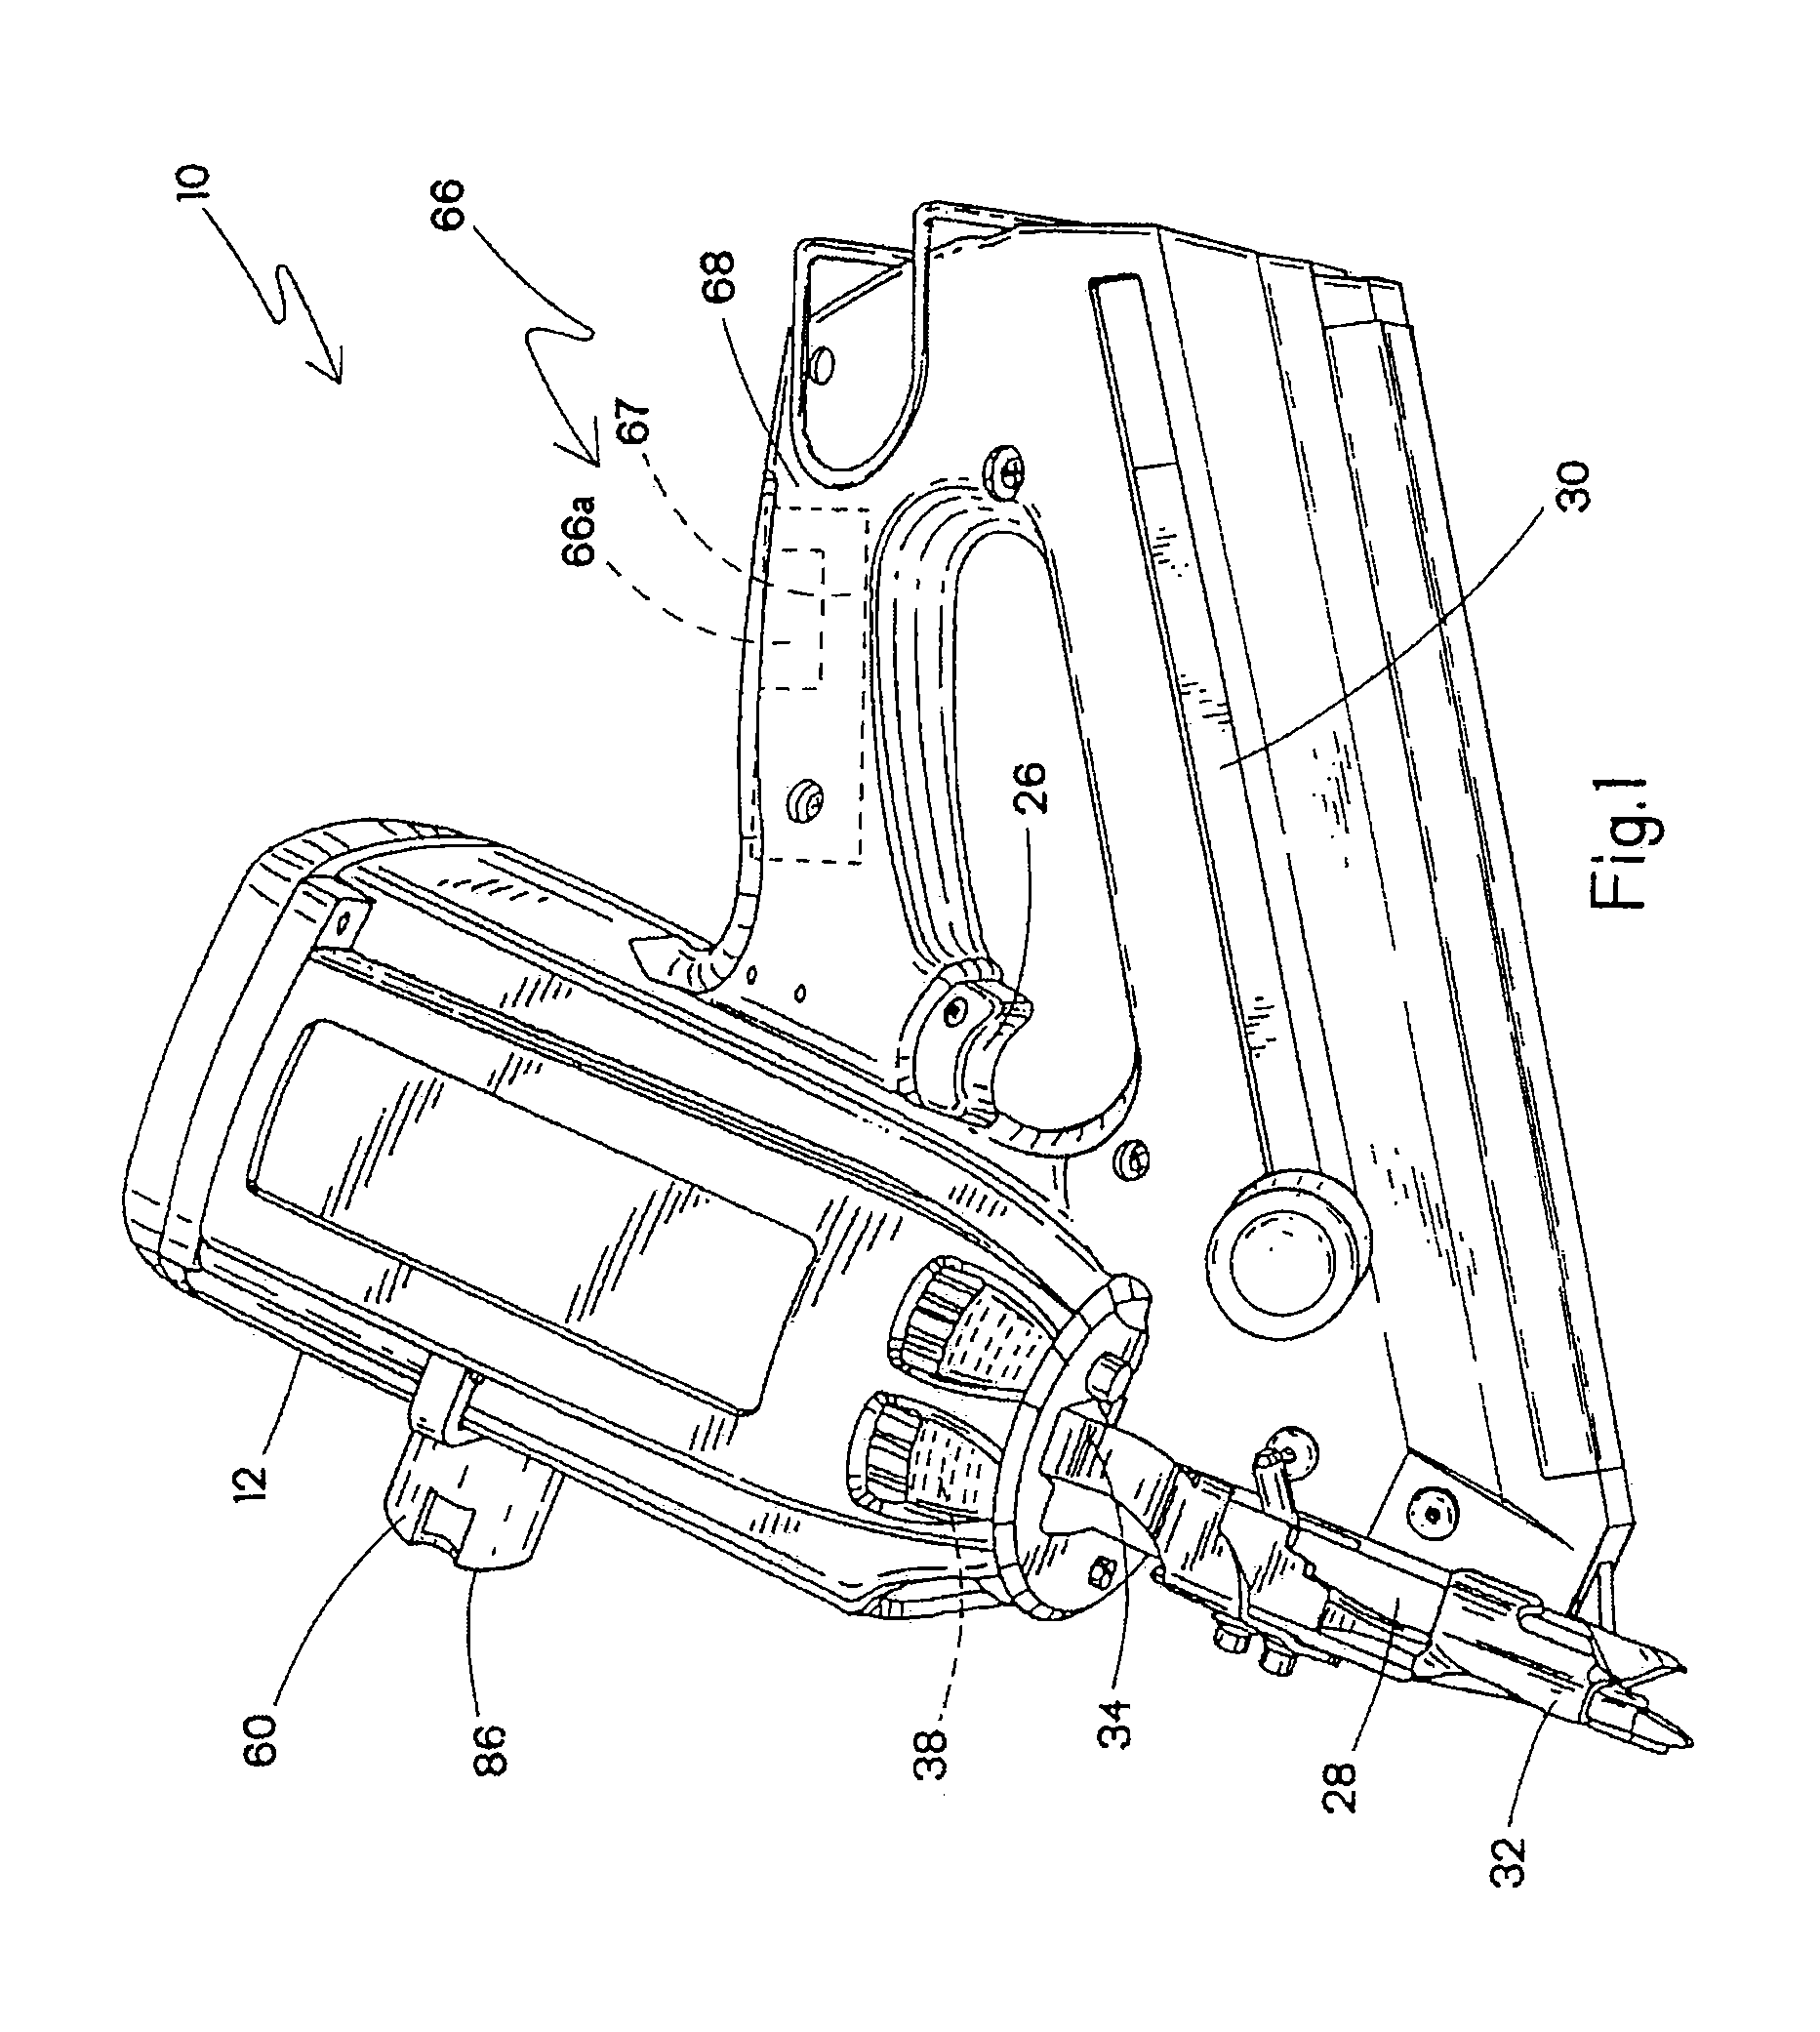 Combustion chamber distance control combustion-powered fastener-driving tool